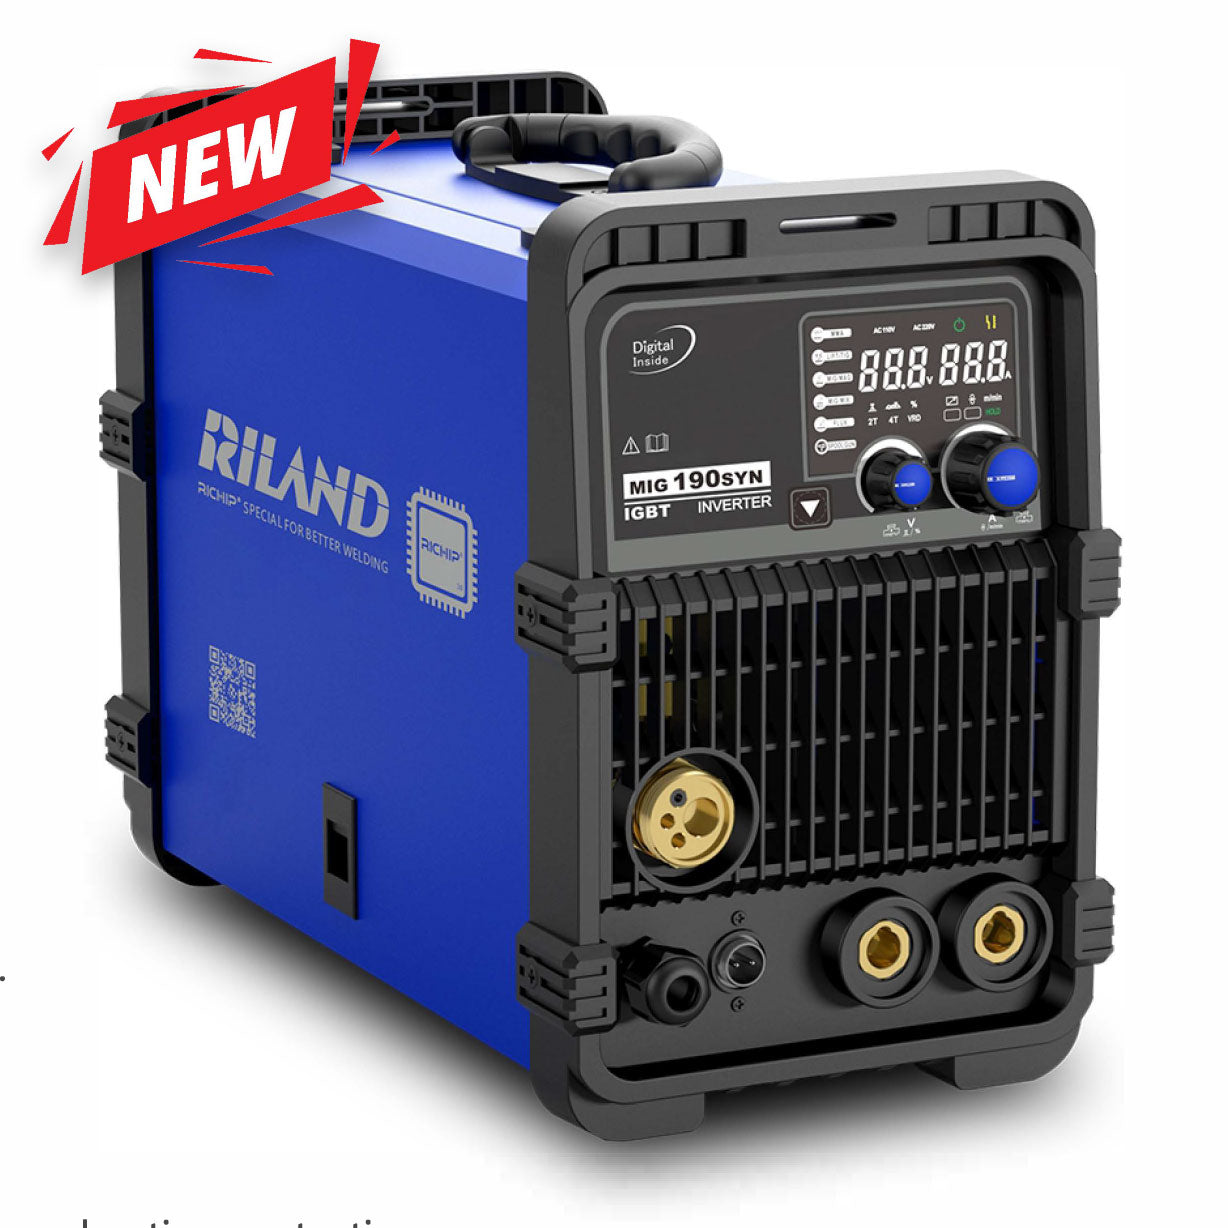 Versatile Pinnacle Riland 190SYN Multi-Process MIG Welder, ideal for Gasless MIG Welding and TIG/MMA Processes